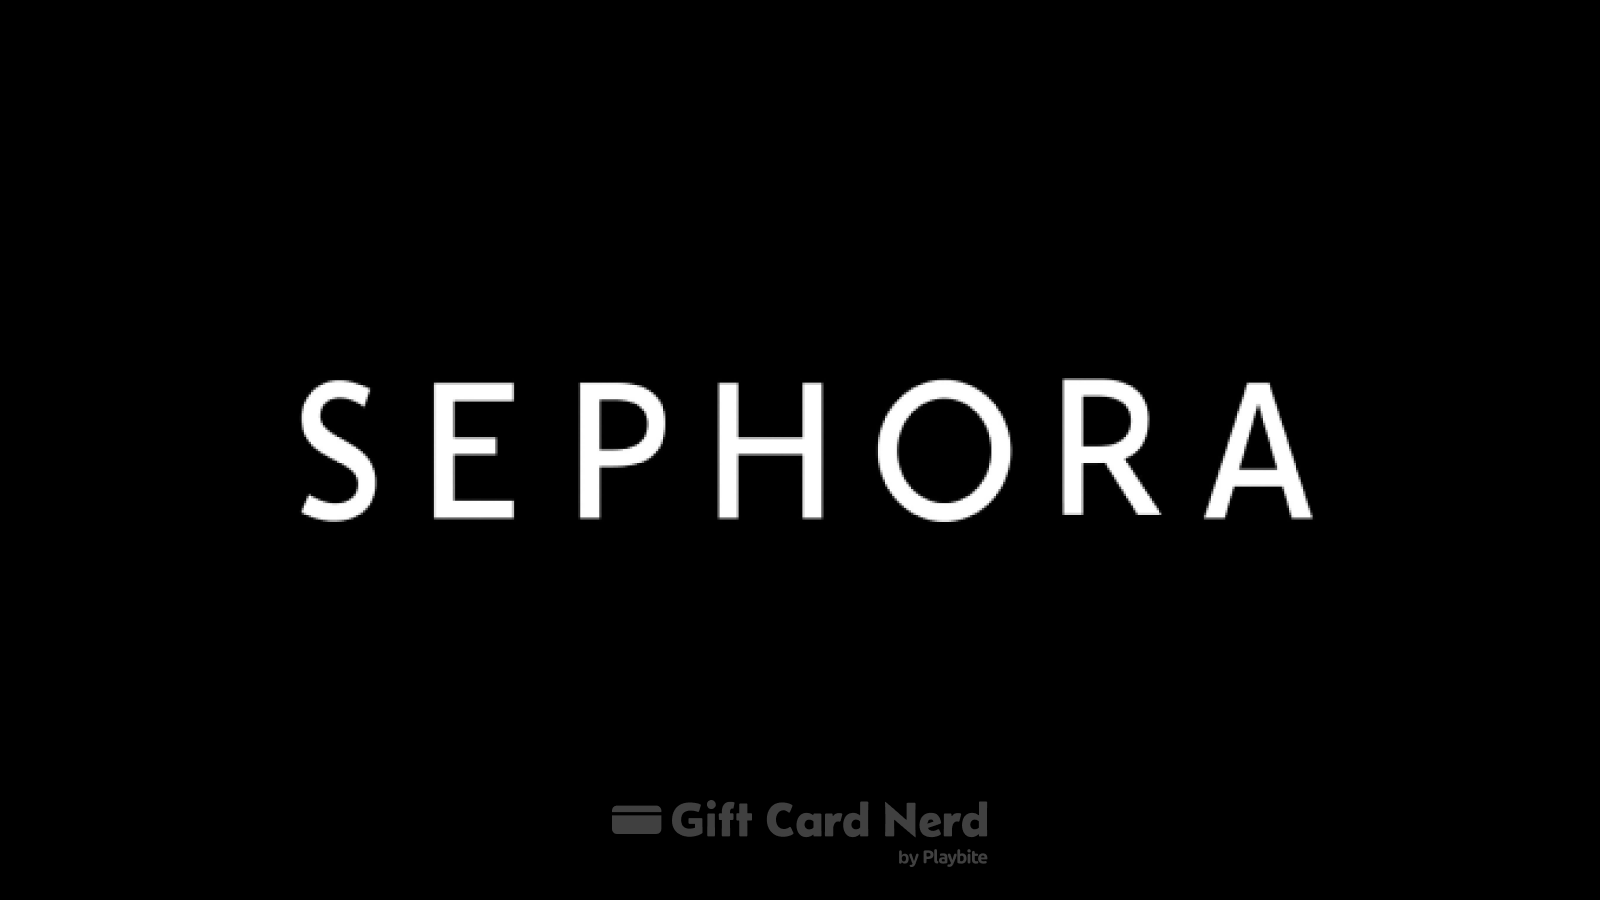 Can I Use a Sephora Gift Card on Roblox?